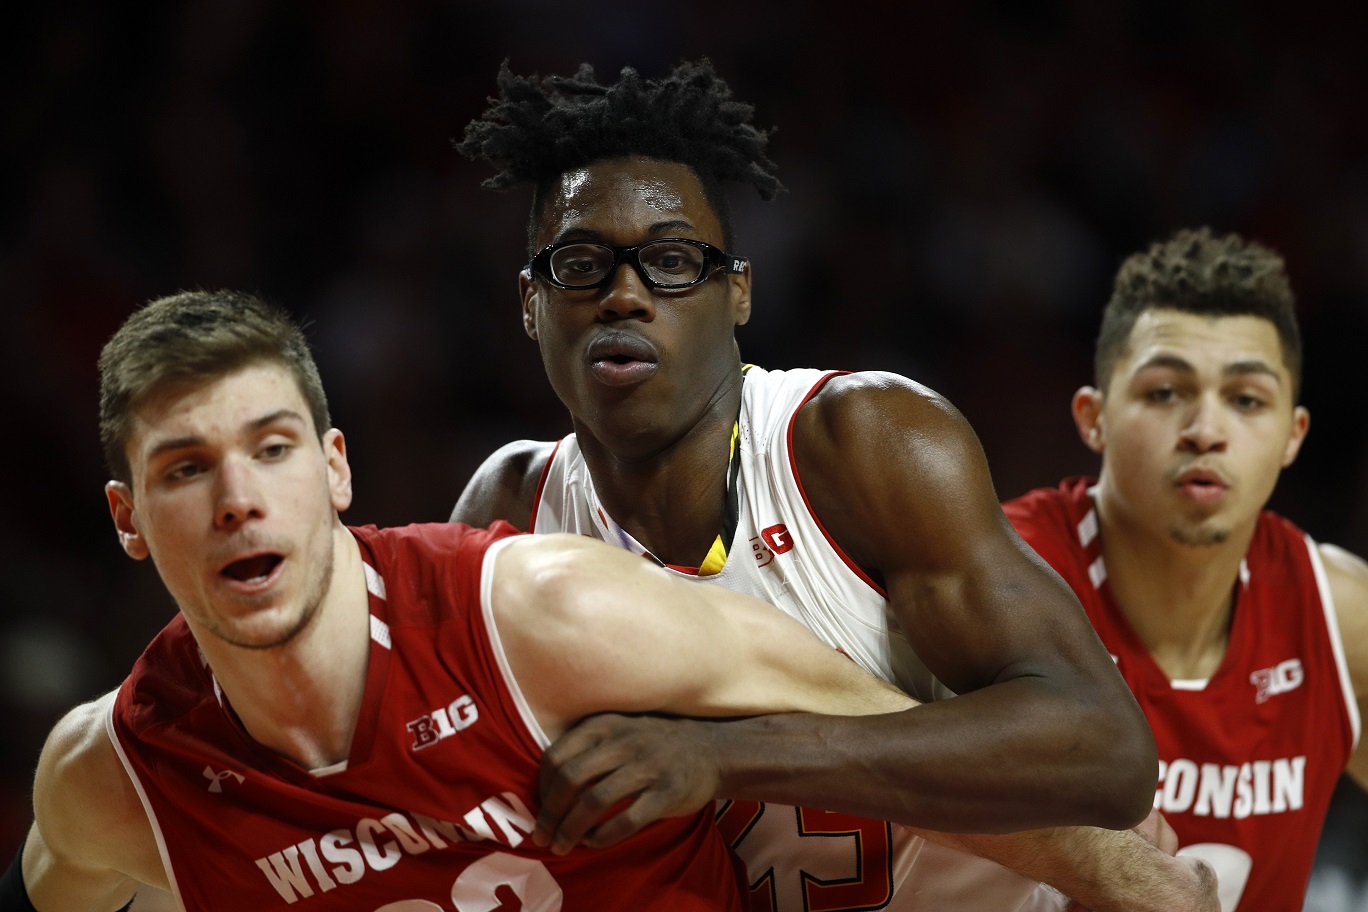 Badgers come back from 21-point, second-half deficit only to lose in final minute vs. No. 19 Maryland